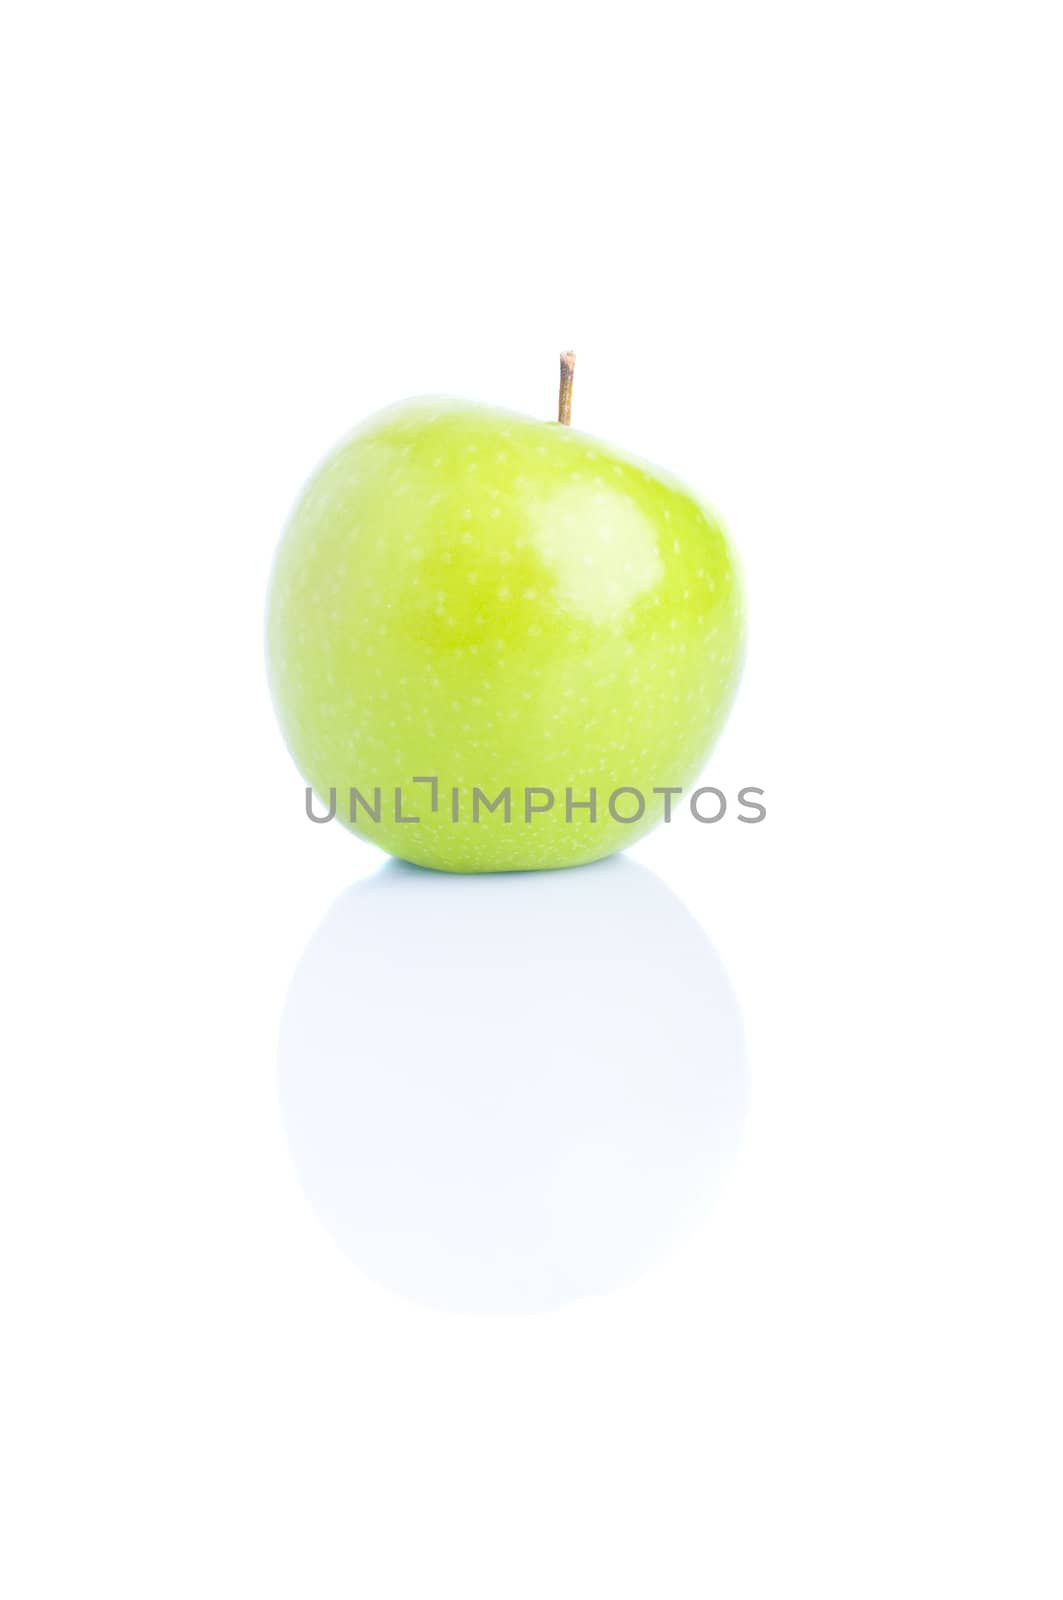 isolated green apple fuirt with white background